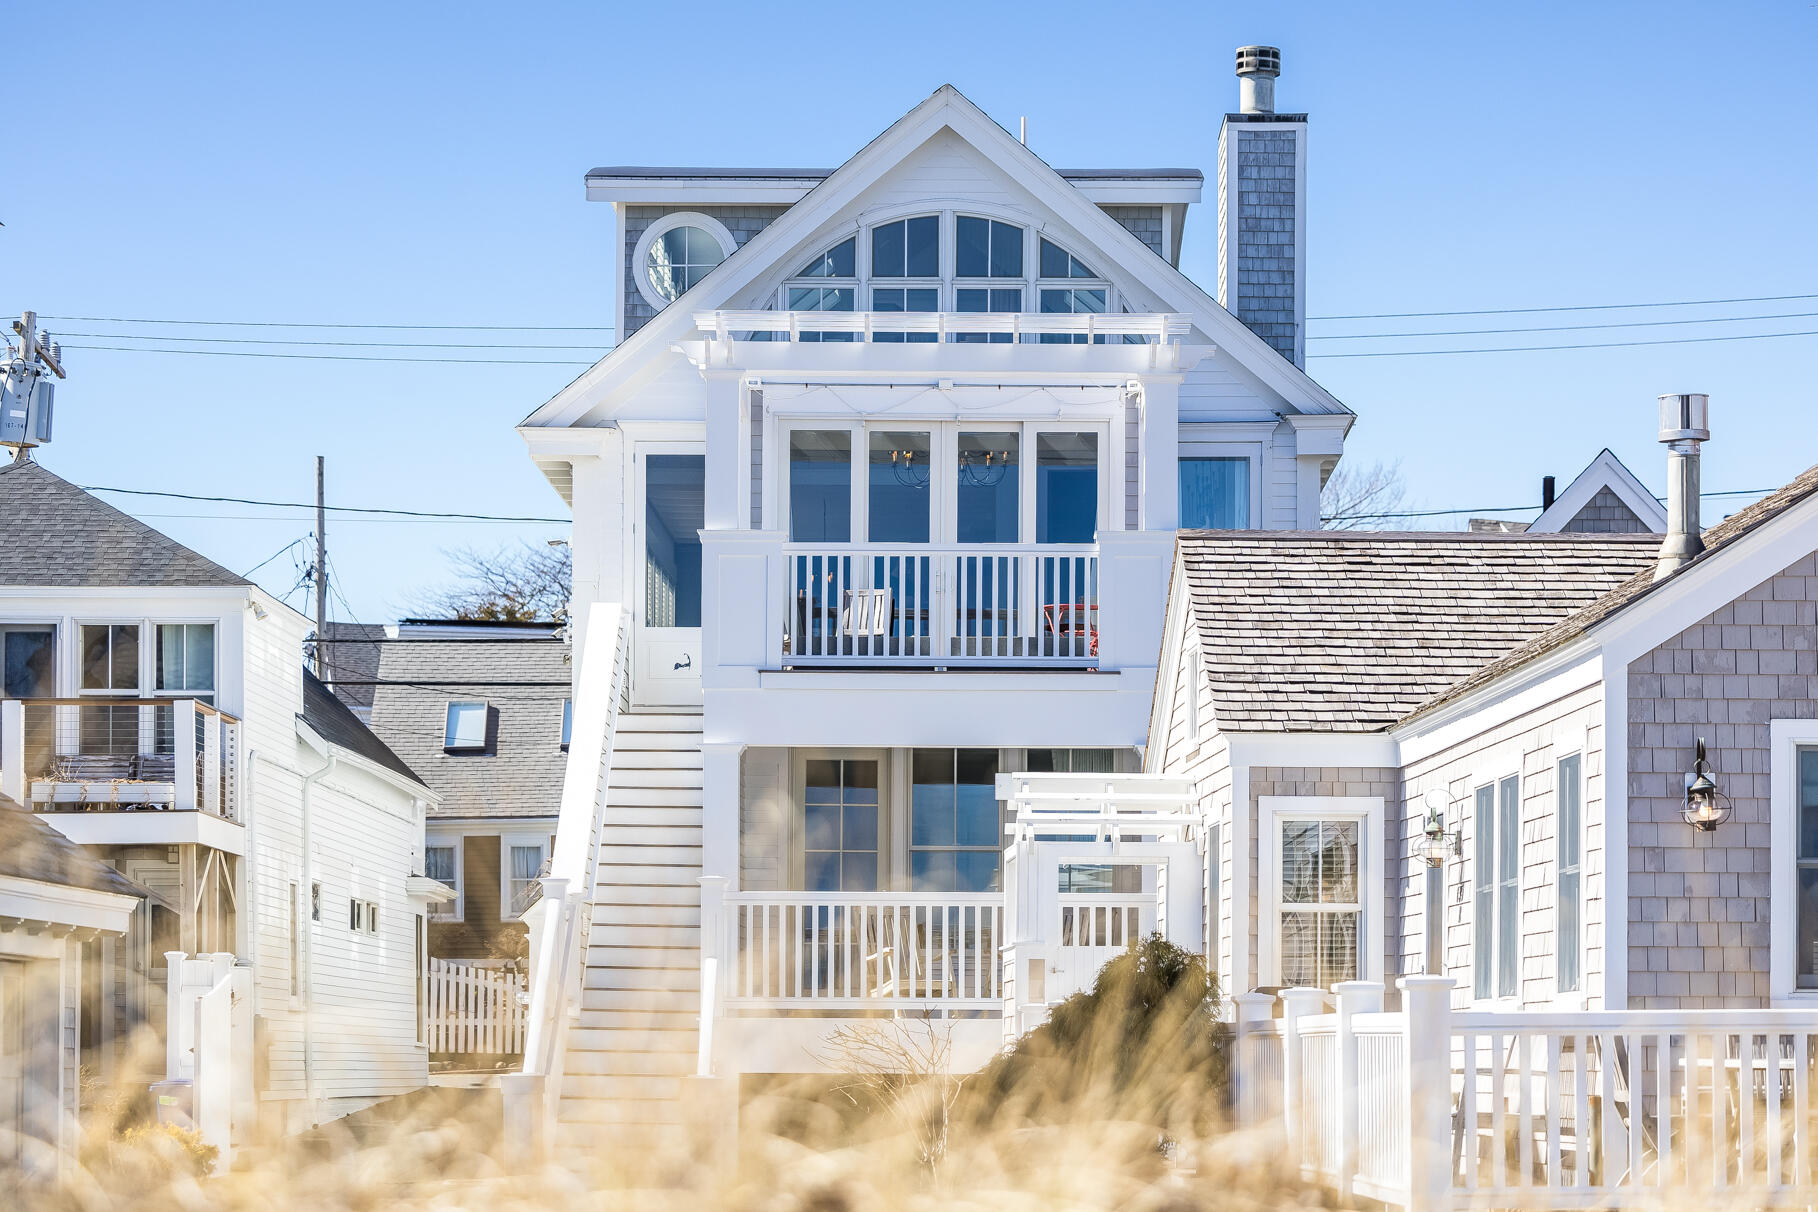 139 Commercial Street, Provincetown, Massachusetts 02657, 2 Bedrooms Bedrooms, 7 Rooms Rooms,2 BathroomsBathrooms,Residential,For Sale,Other,139 Commercial Street,22402319